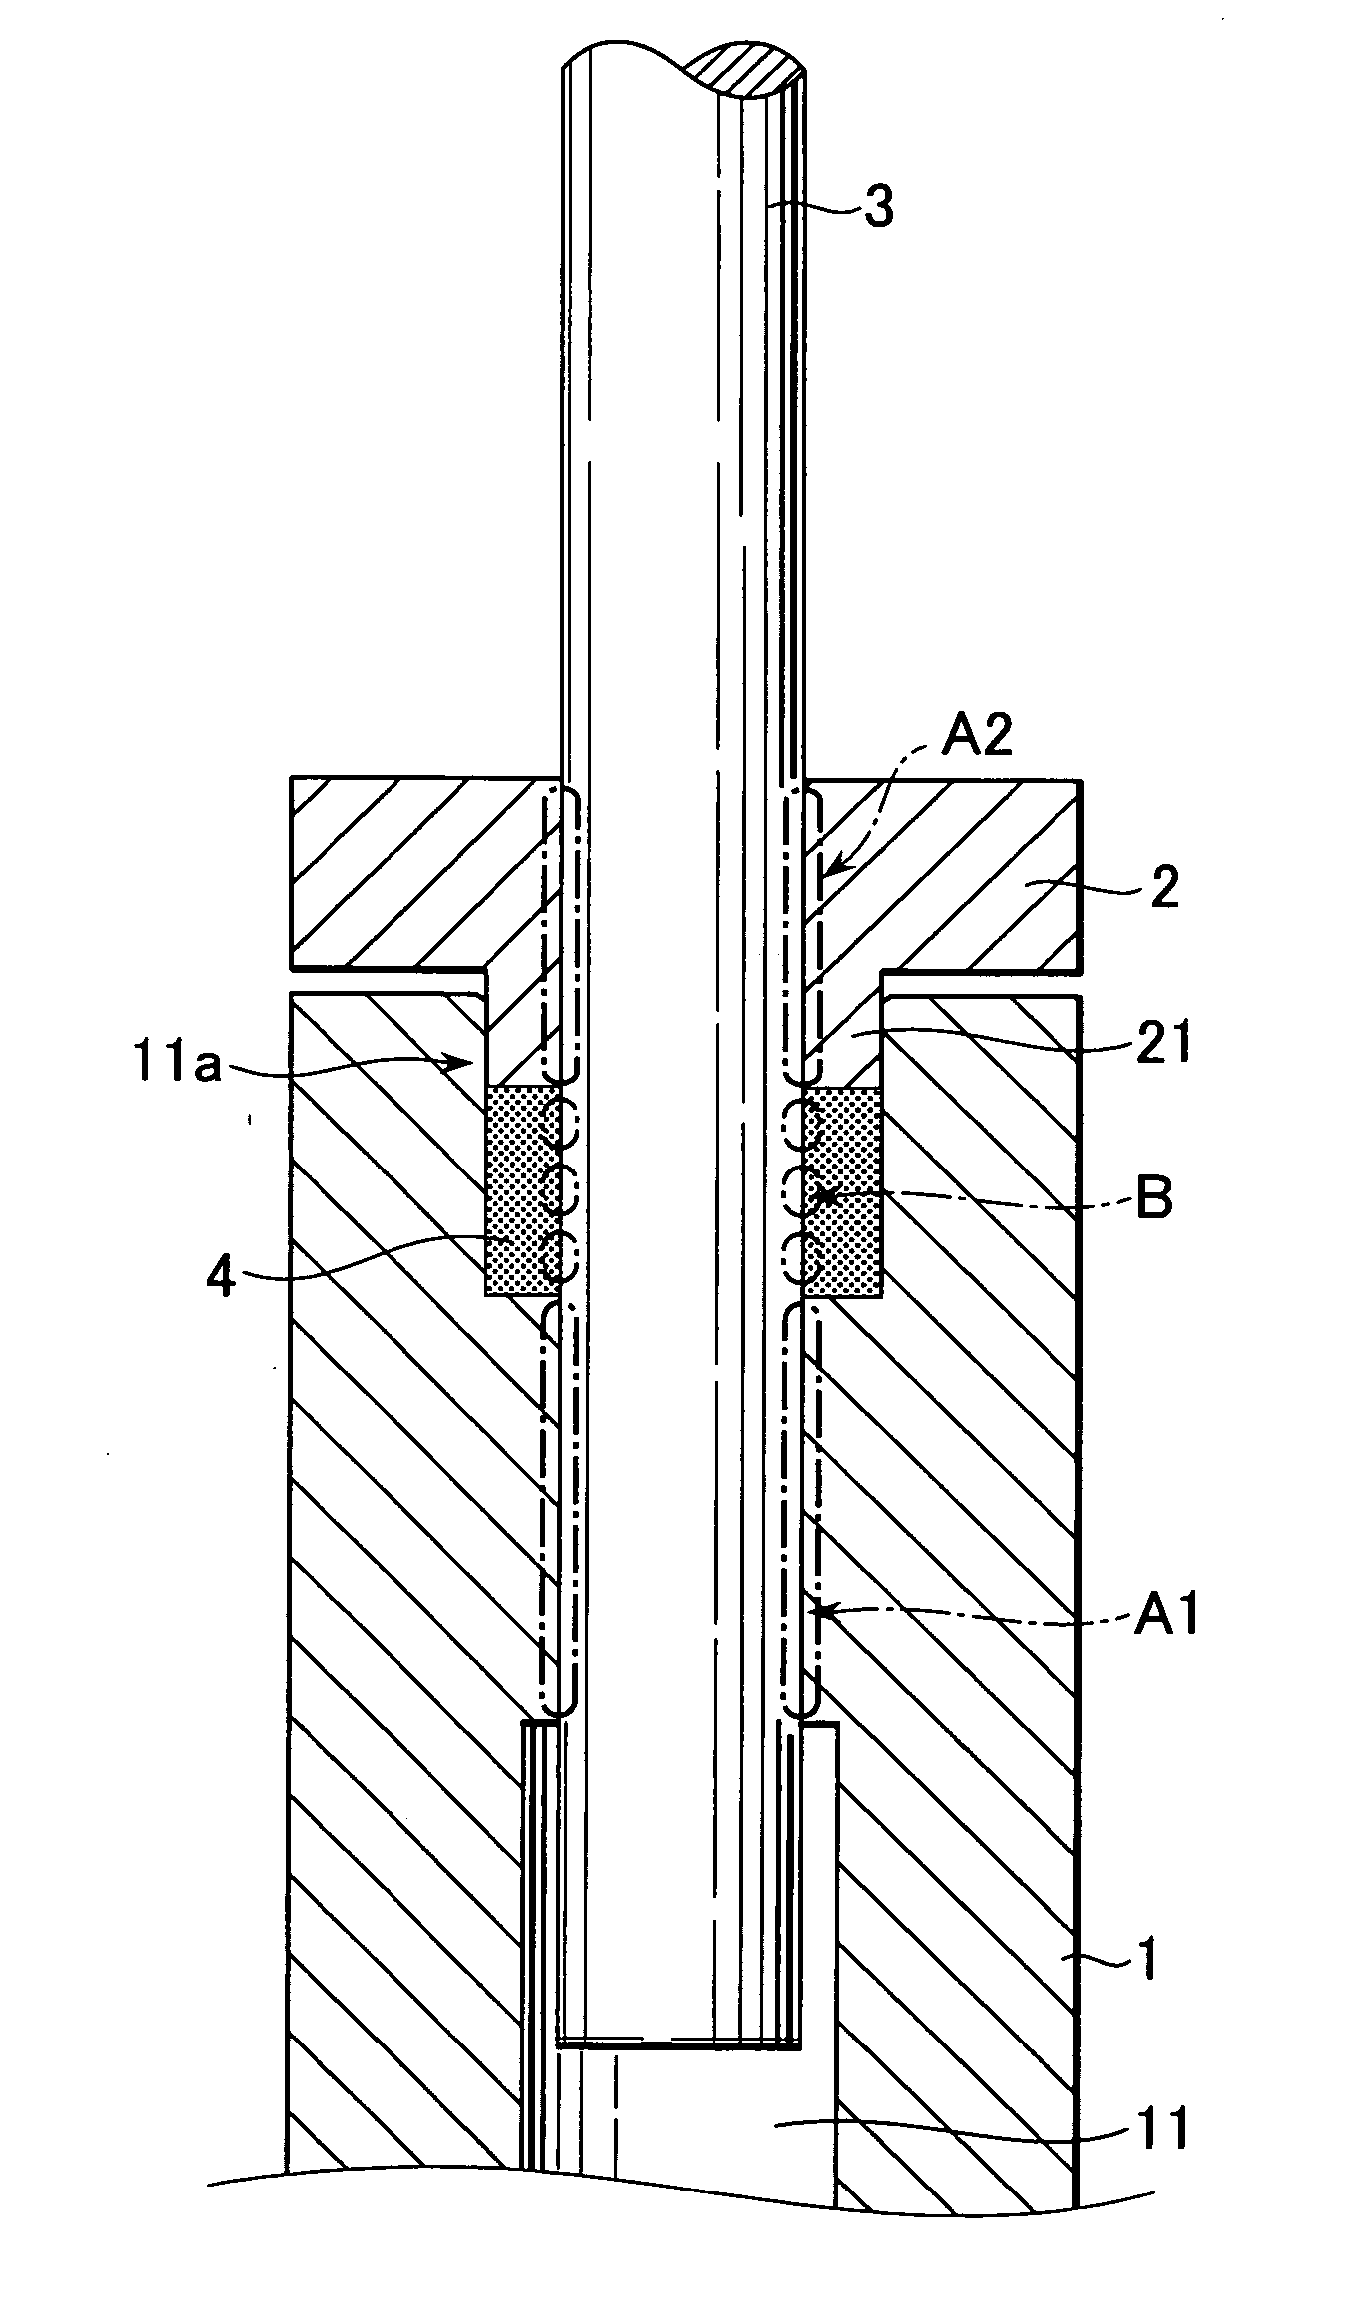 Tool holding structure